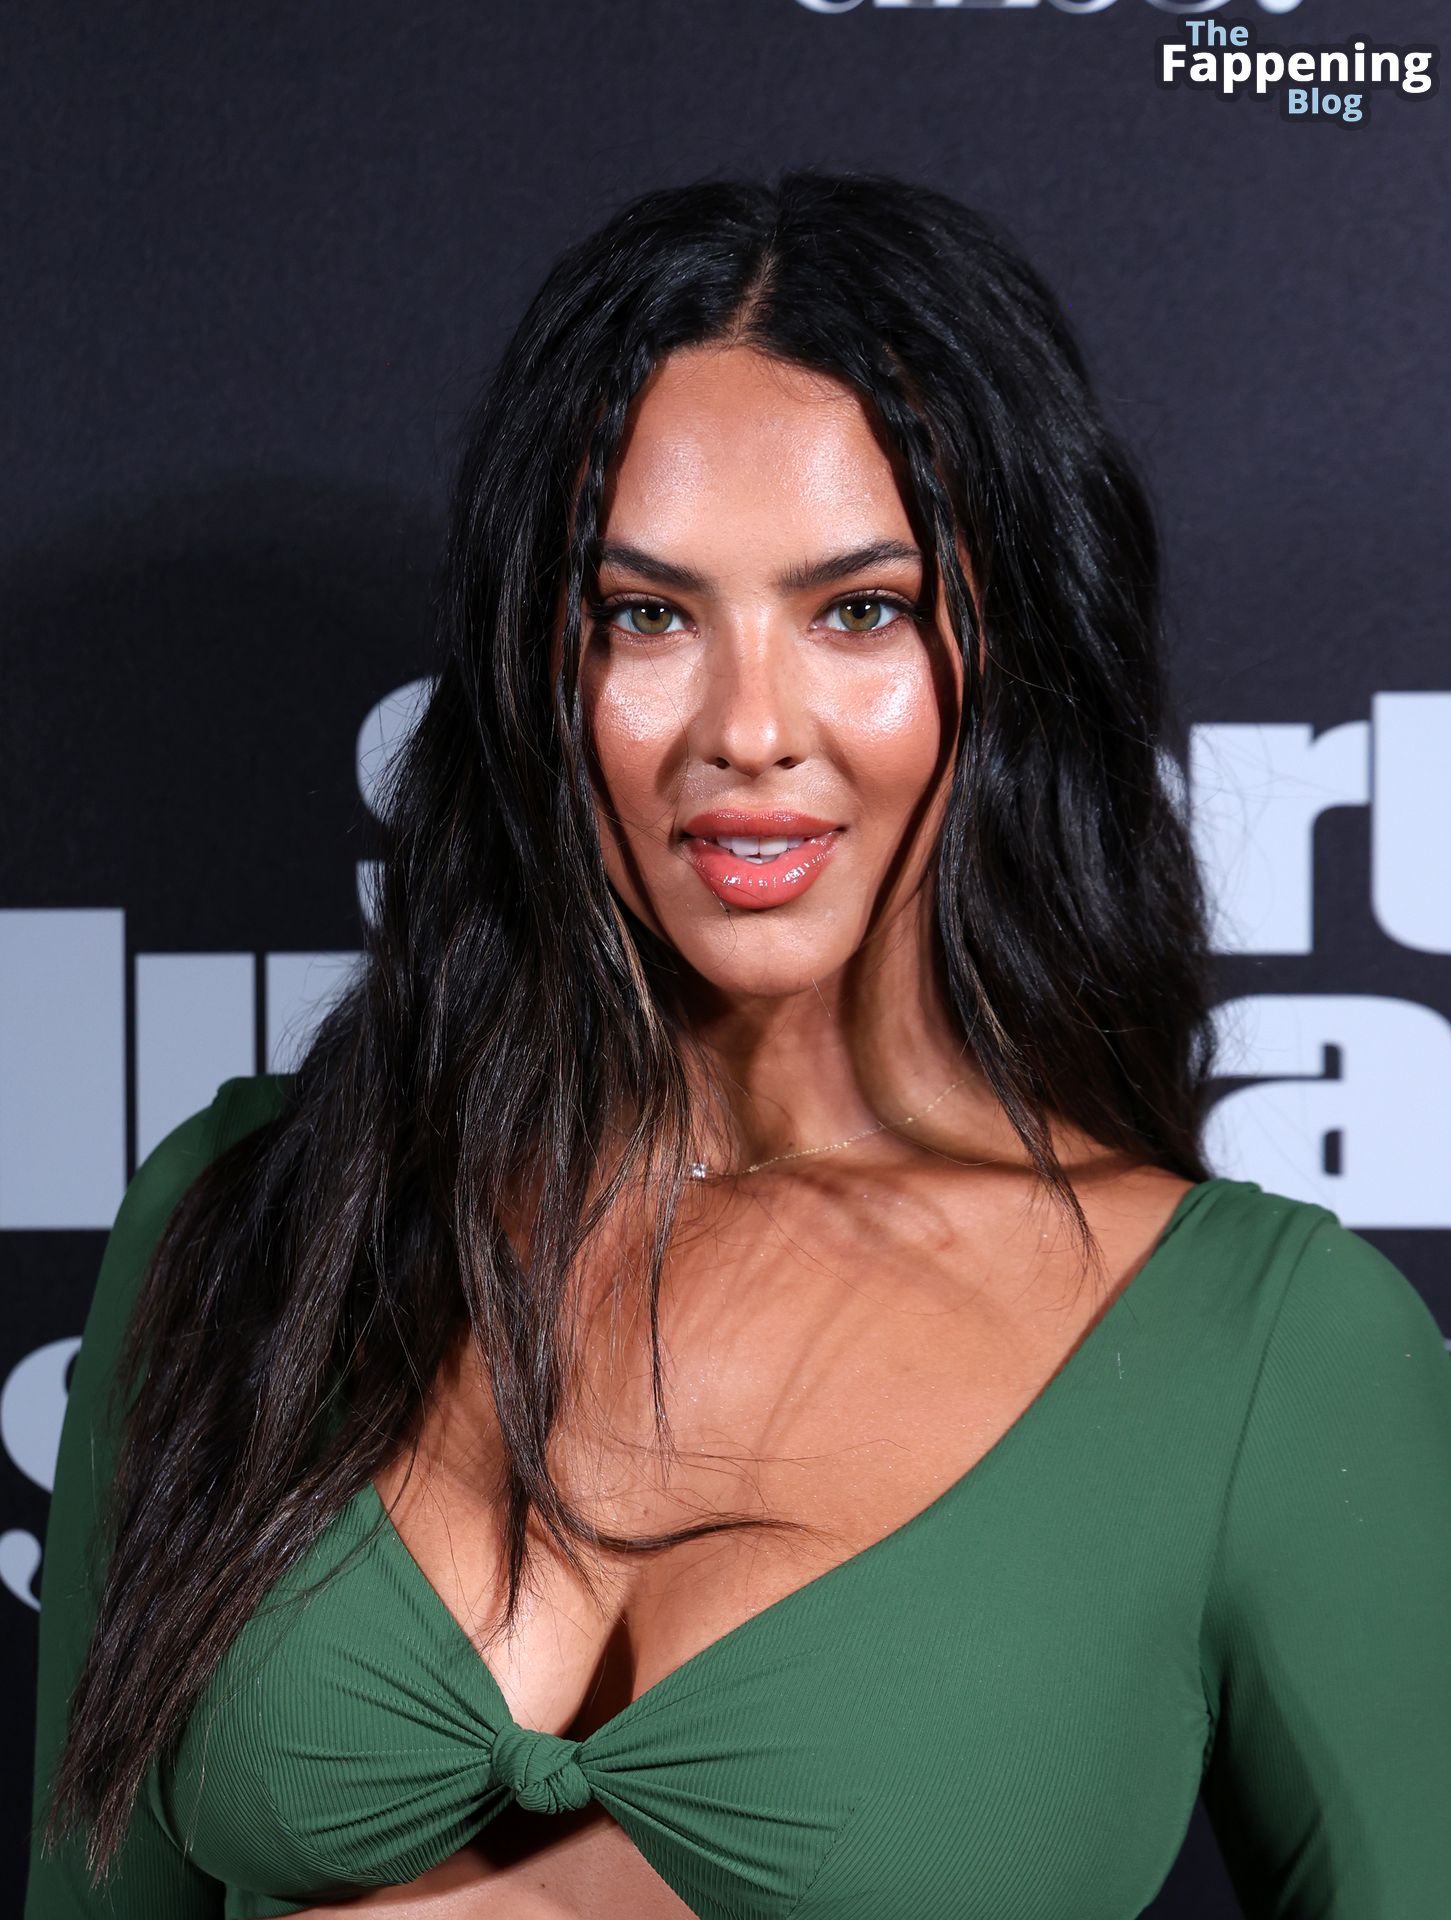 Christen Harper Looks Hot at the Sports Illustrated Swimsuit Show (40 Photos)